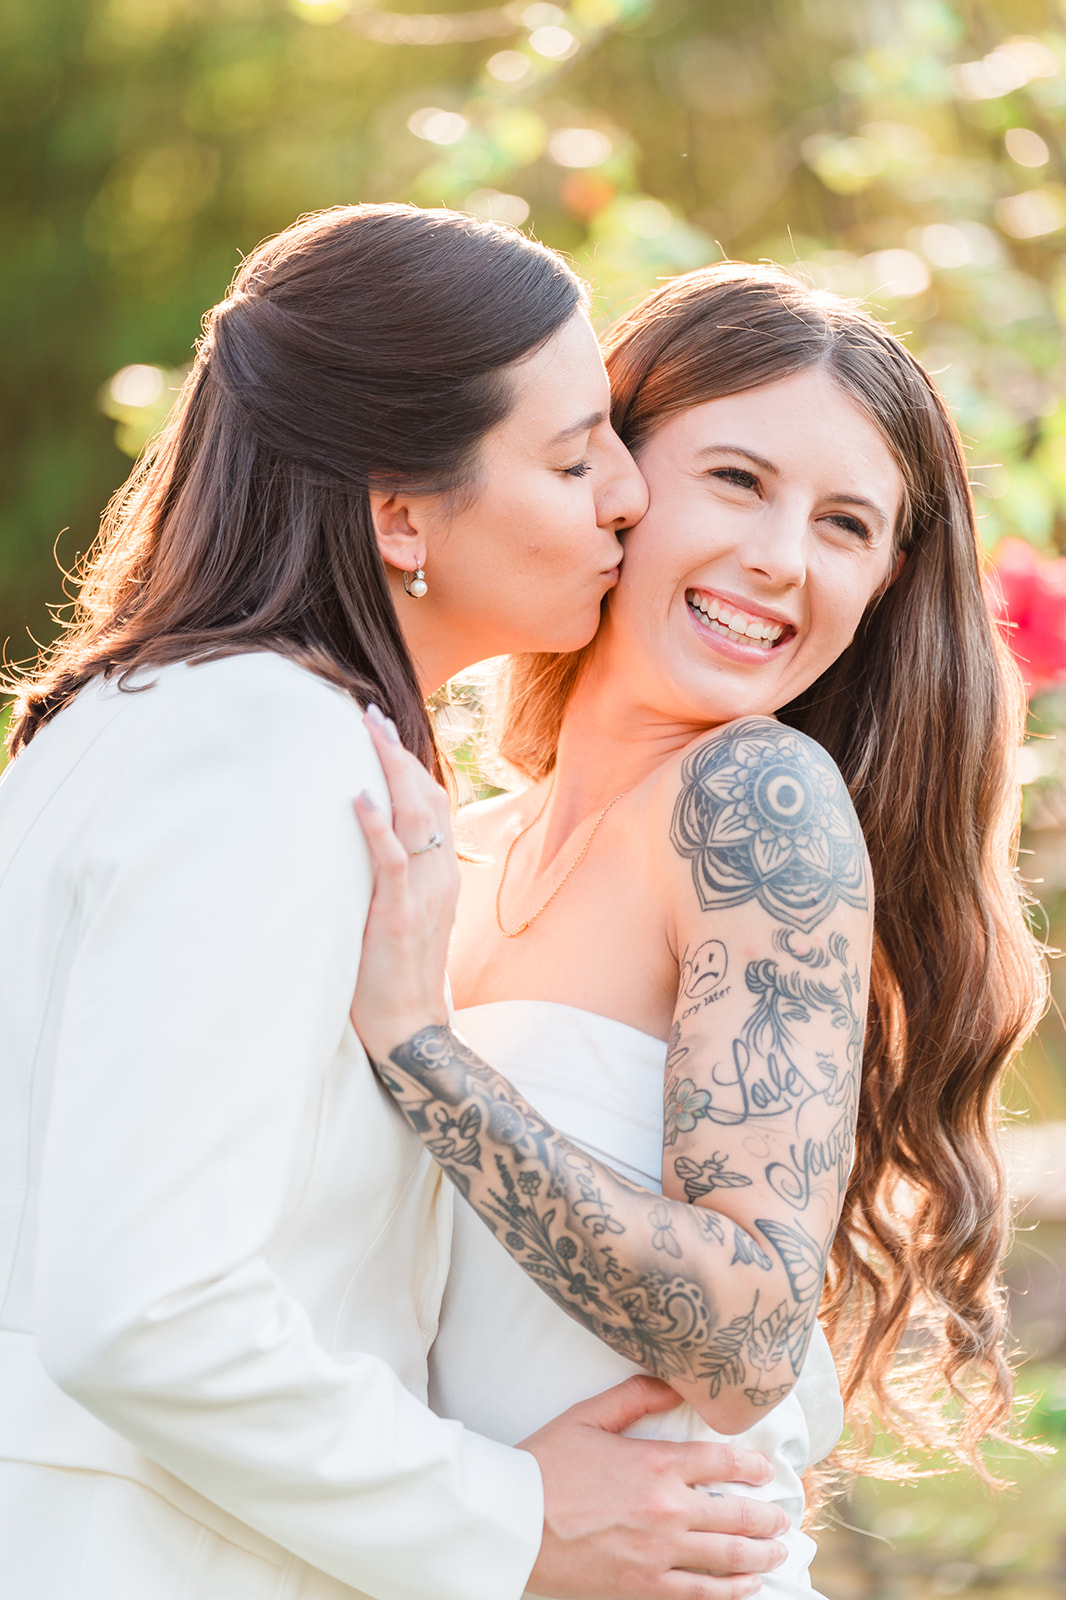 Two LGBTQ brides share a moment, one kissing the other's cheek, captured in perfect lighting.